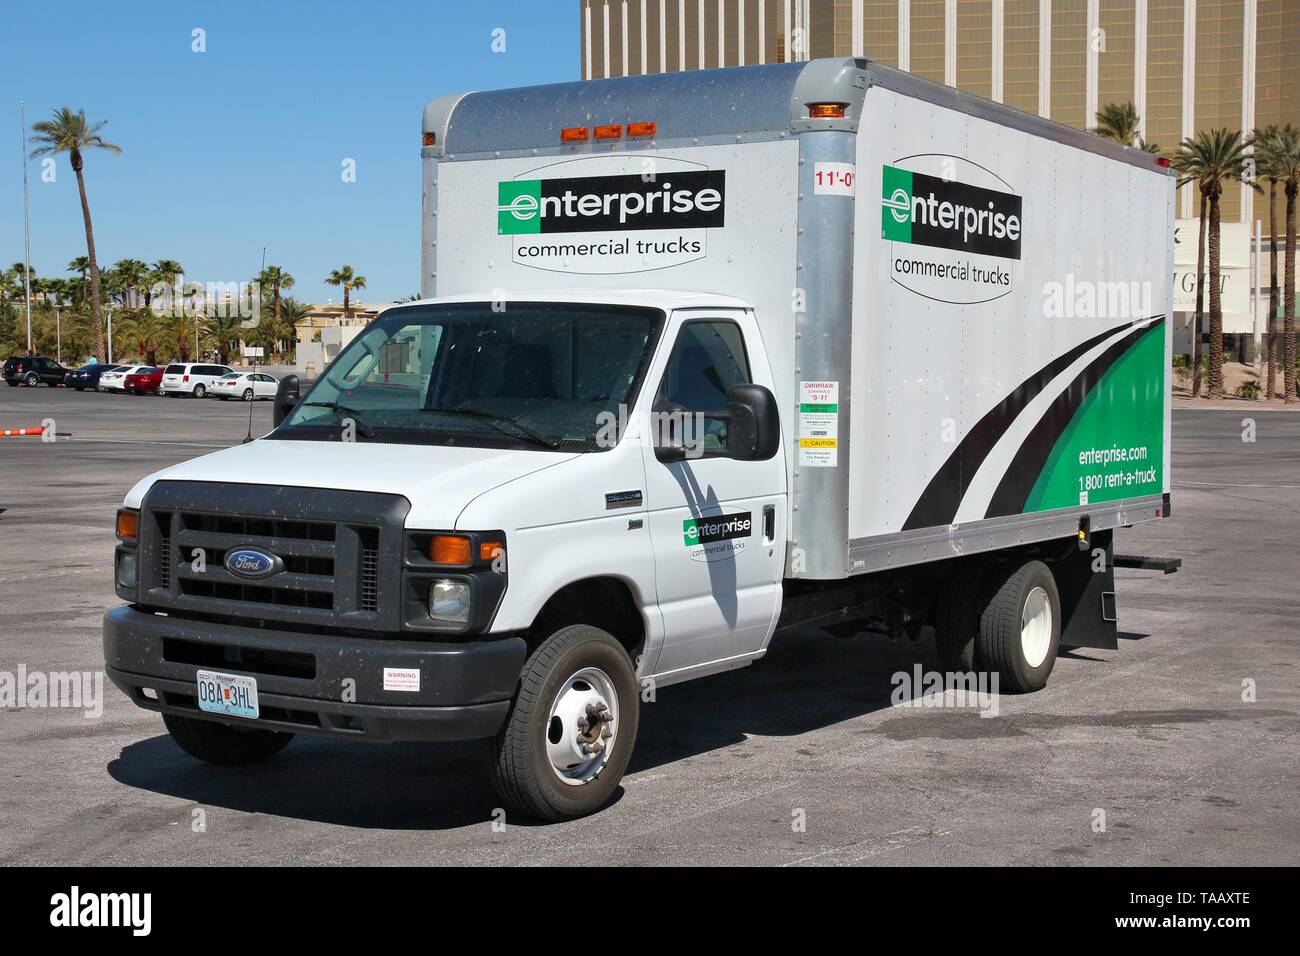 Enterprise Rent A Car High Resolution Stock Photography and Images - Alamy